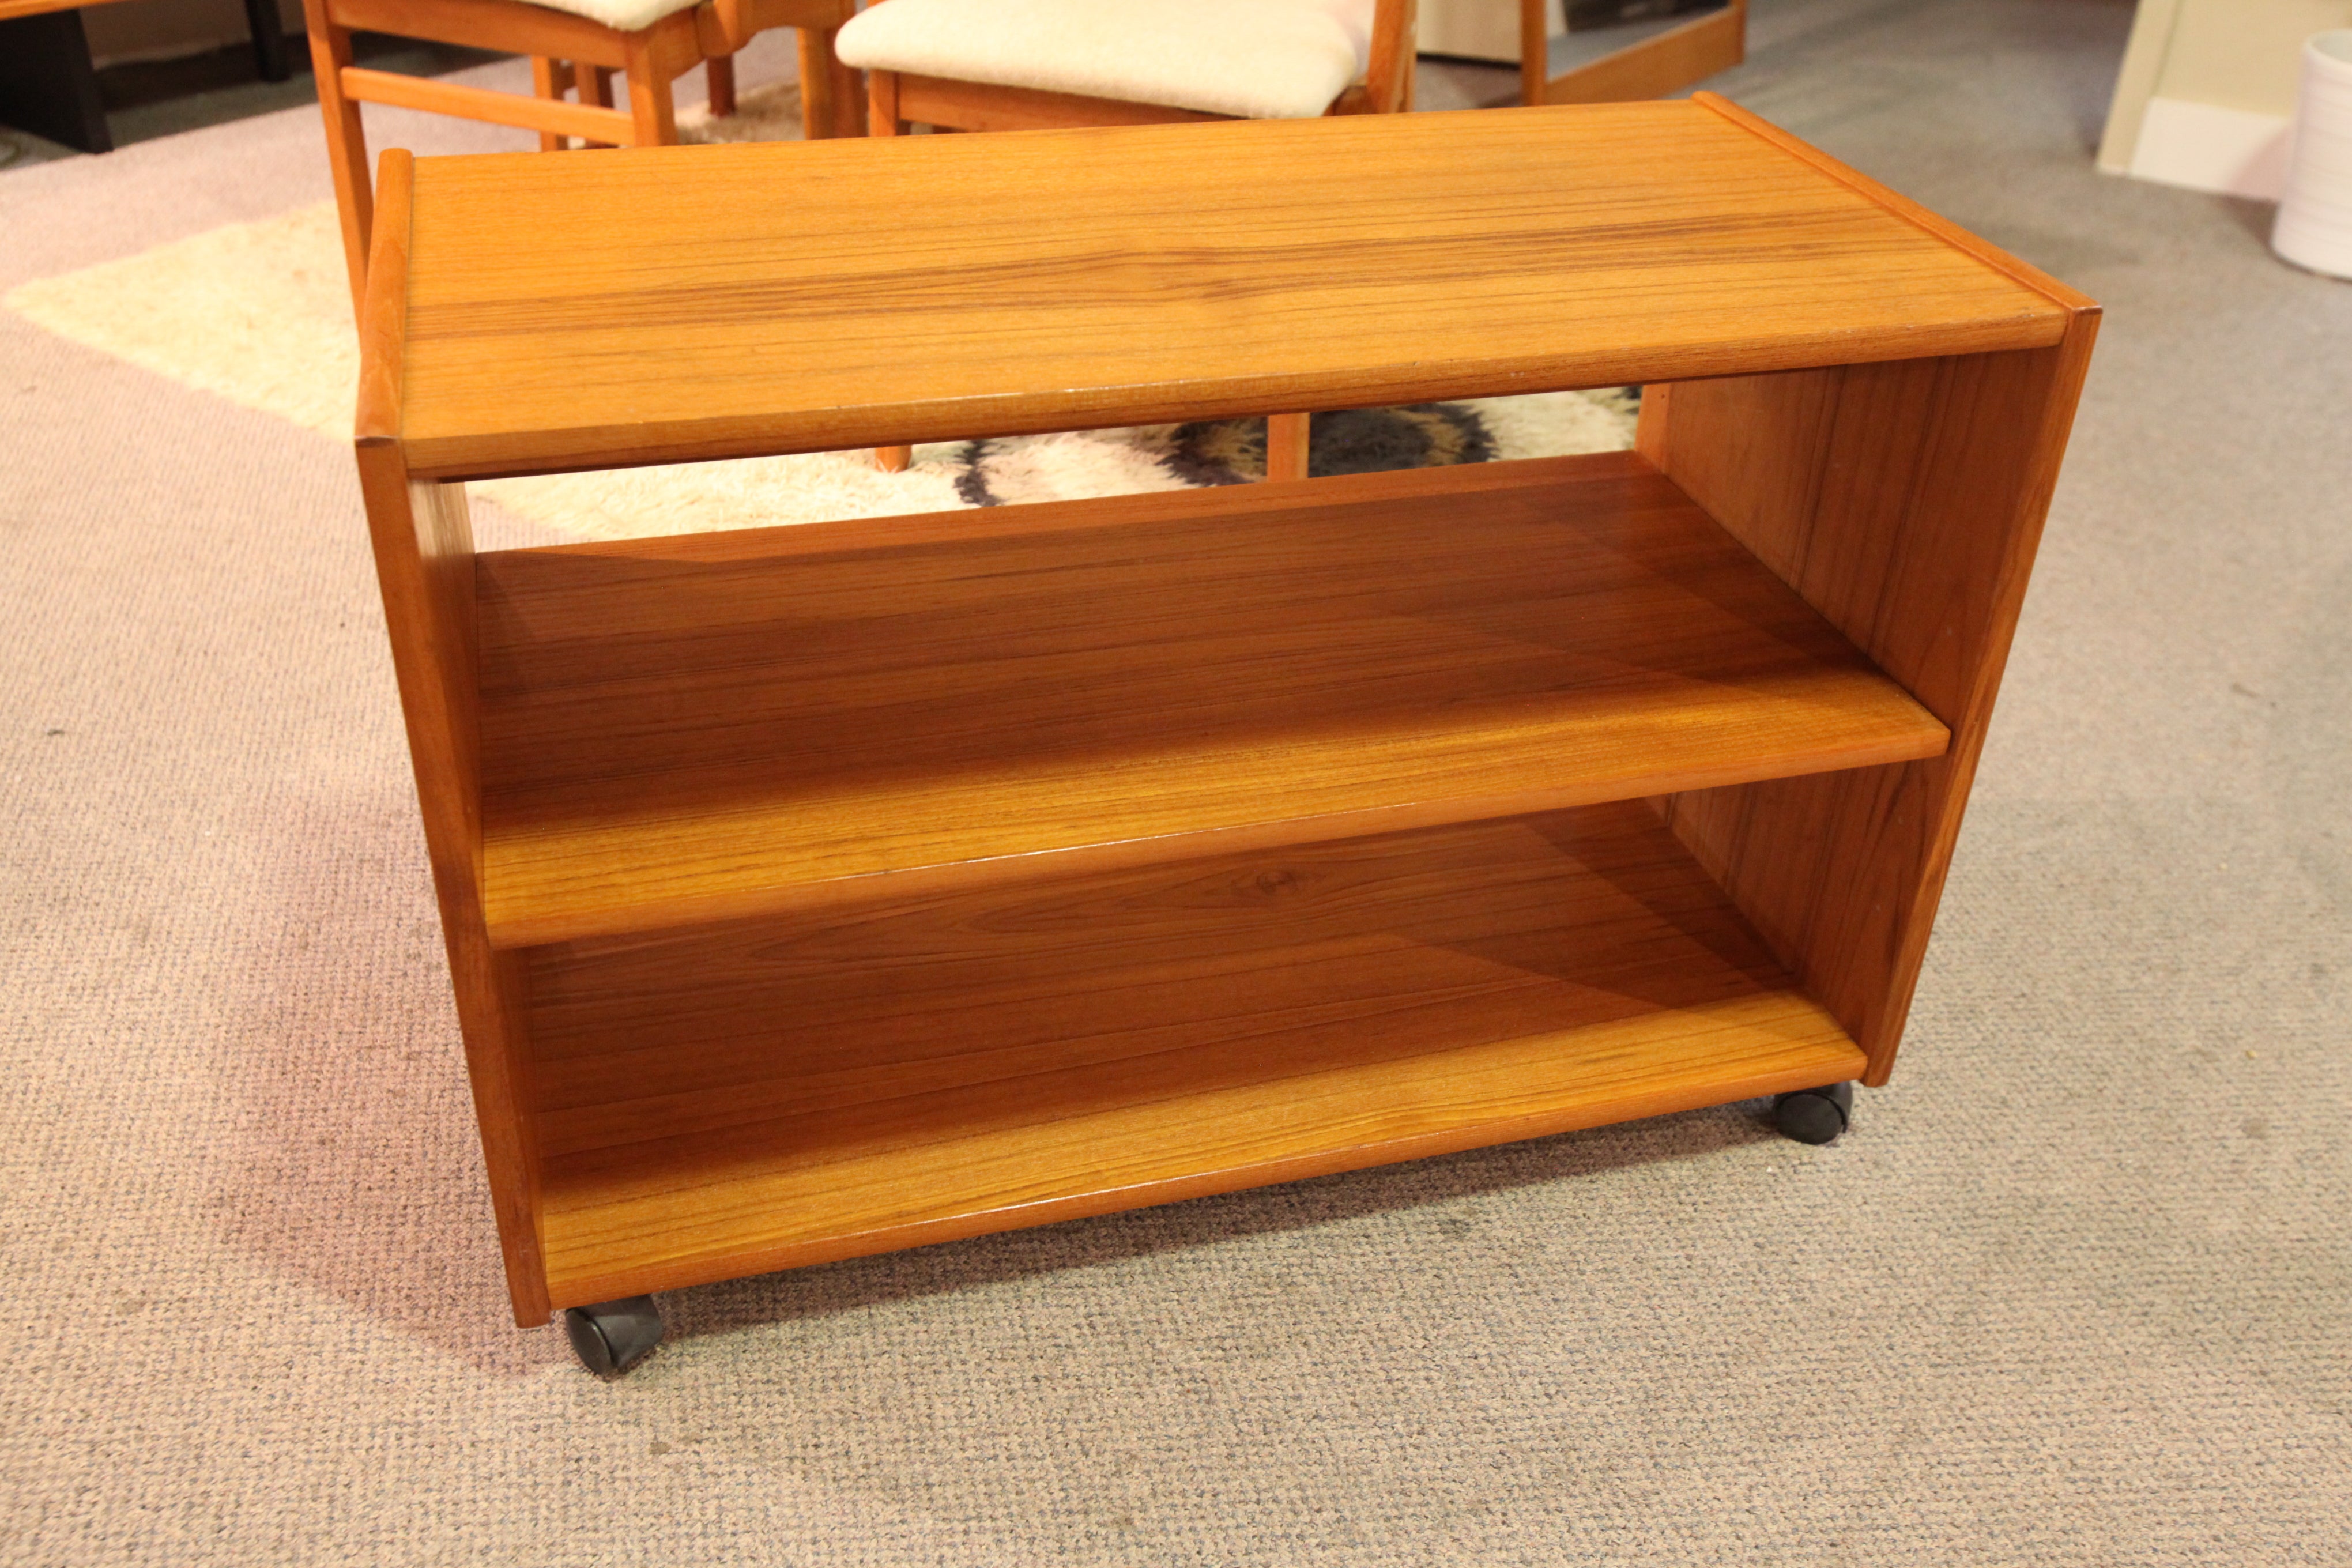 Vintage Teak Stereo / TV Stand on Casters (33" x 16" x 22"H)